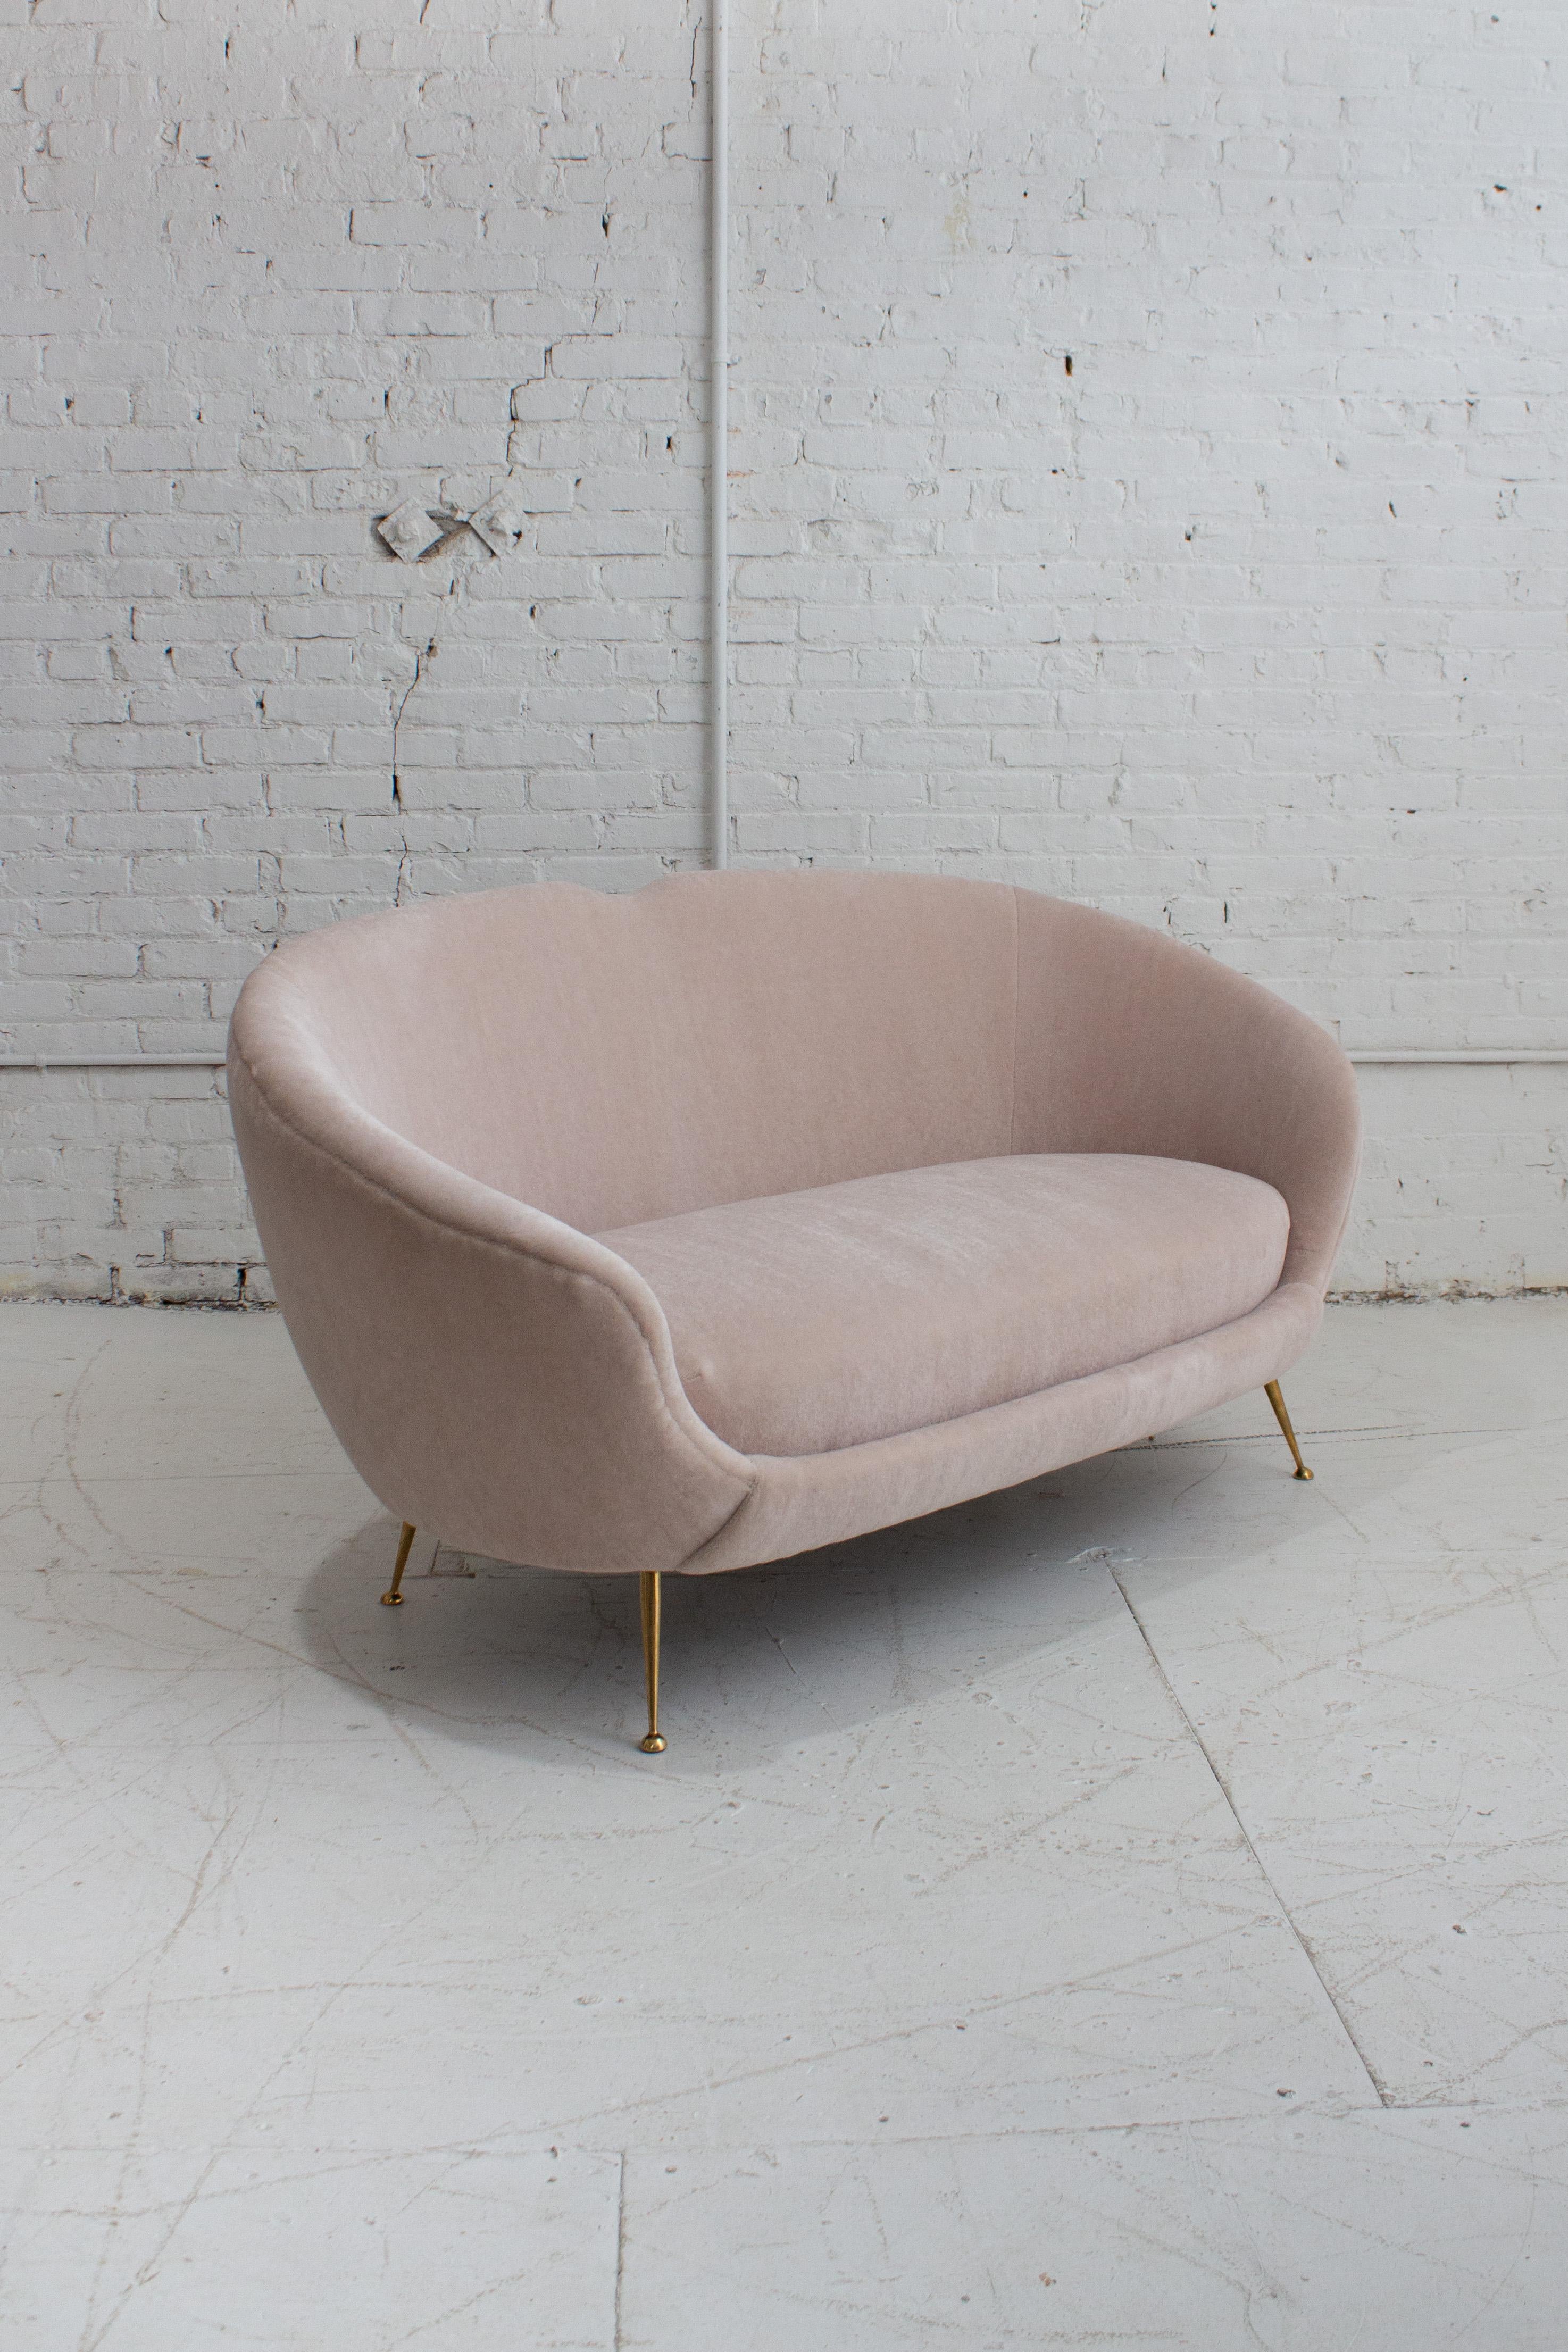 A 1950's Italian settee or loveseat attributed to ISA Bergamo. Newly reupholstered in a high quality luxury mohair. A soft high pile fabric with a color that reads as both a creamy neutral and pale blush depending on the light. Rounded silhouette